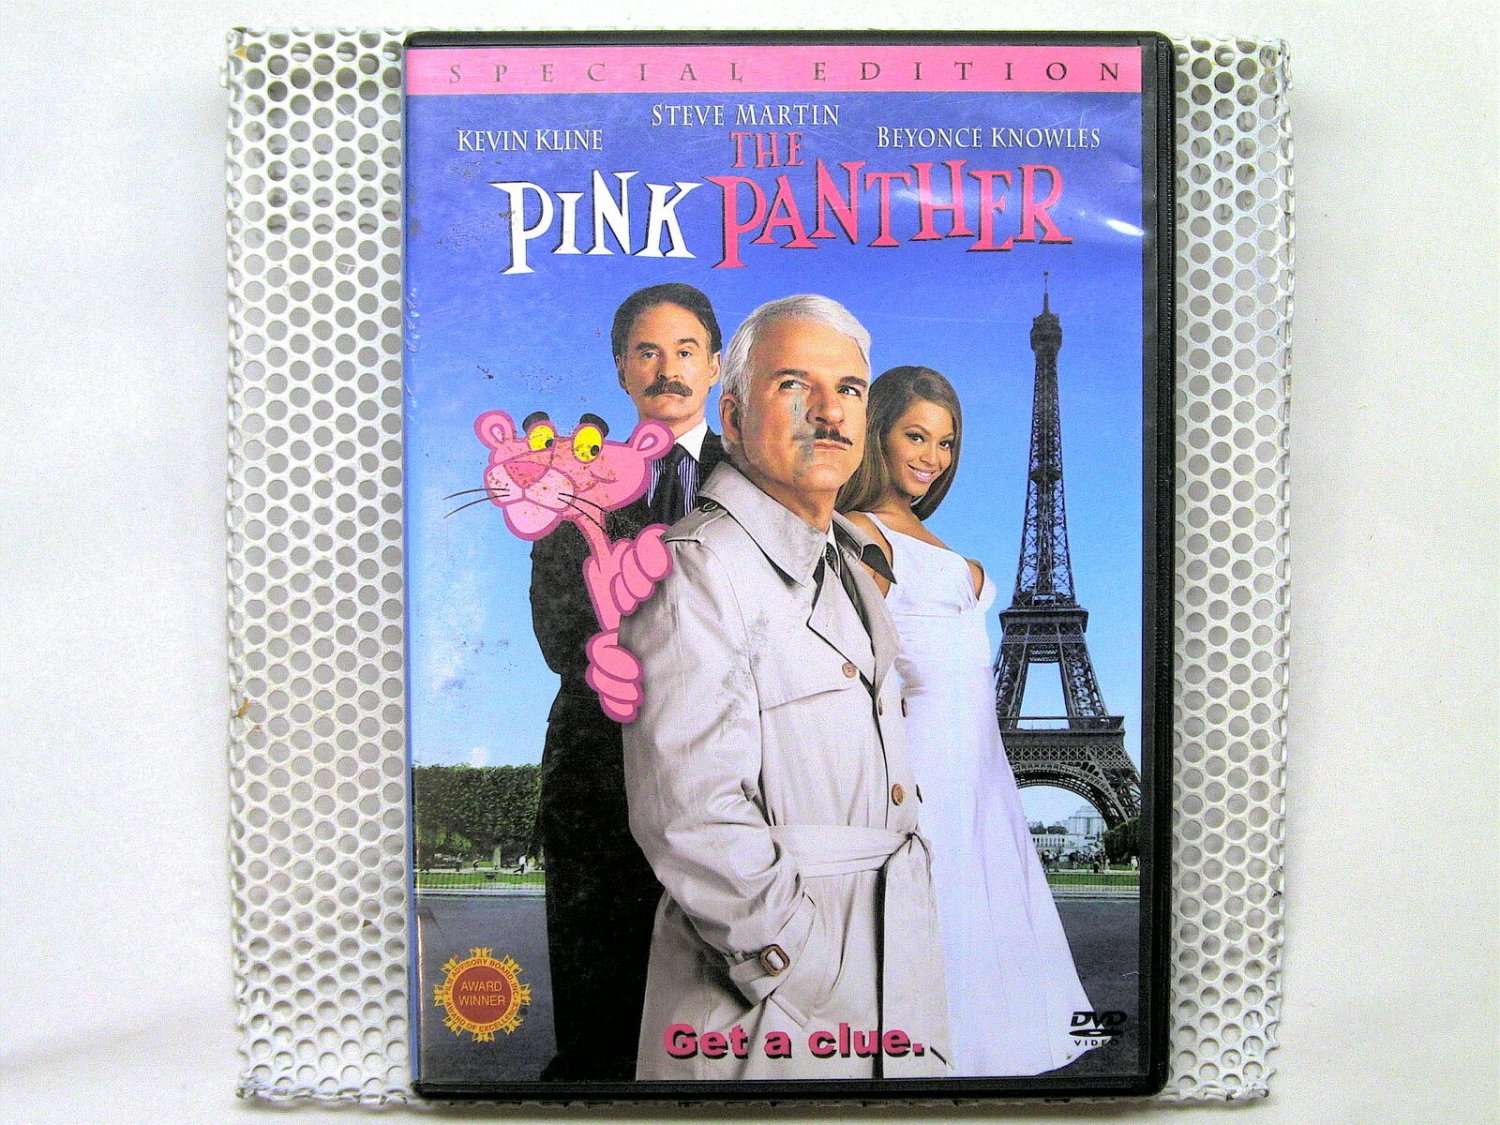 The Pink Panther Kevin Kline Steve Martin Beyonce Knowles [DVD]